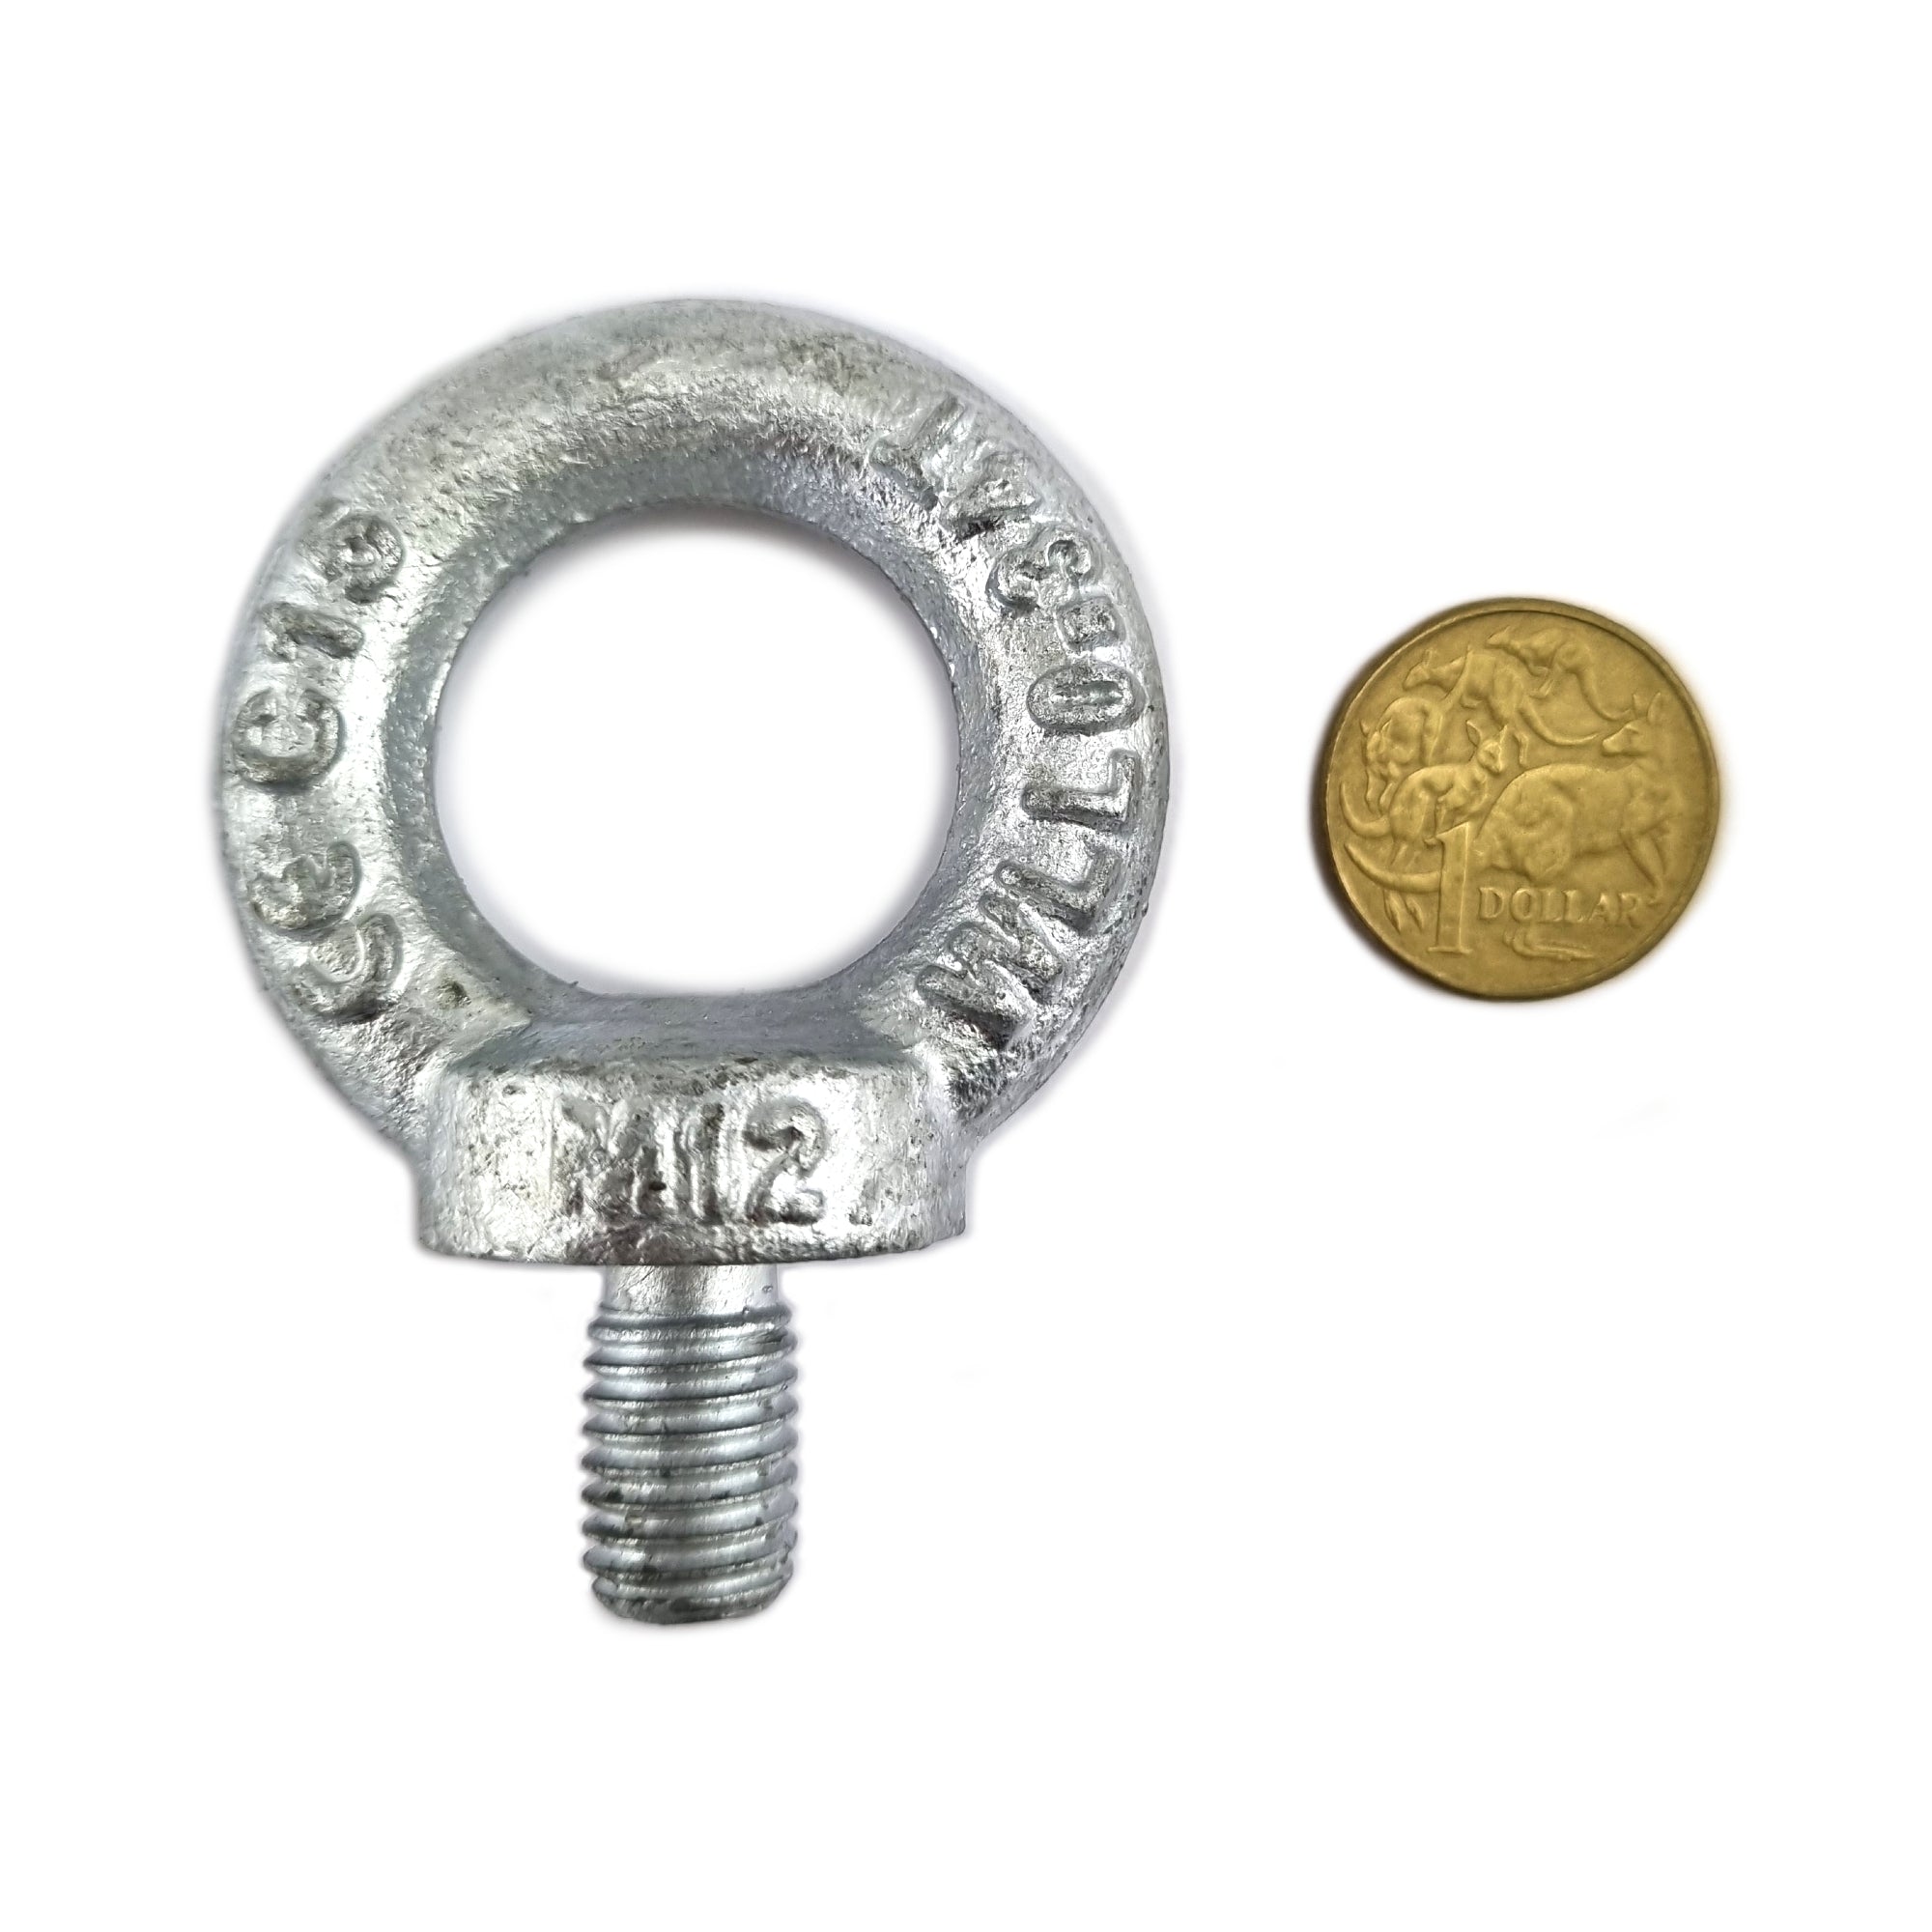 Lifting Eye Bolt Galvanised, Size 12mm x 15mm Thread. Shop hardware bolts online. Australia wide shipping.